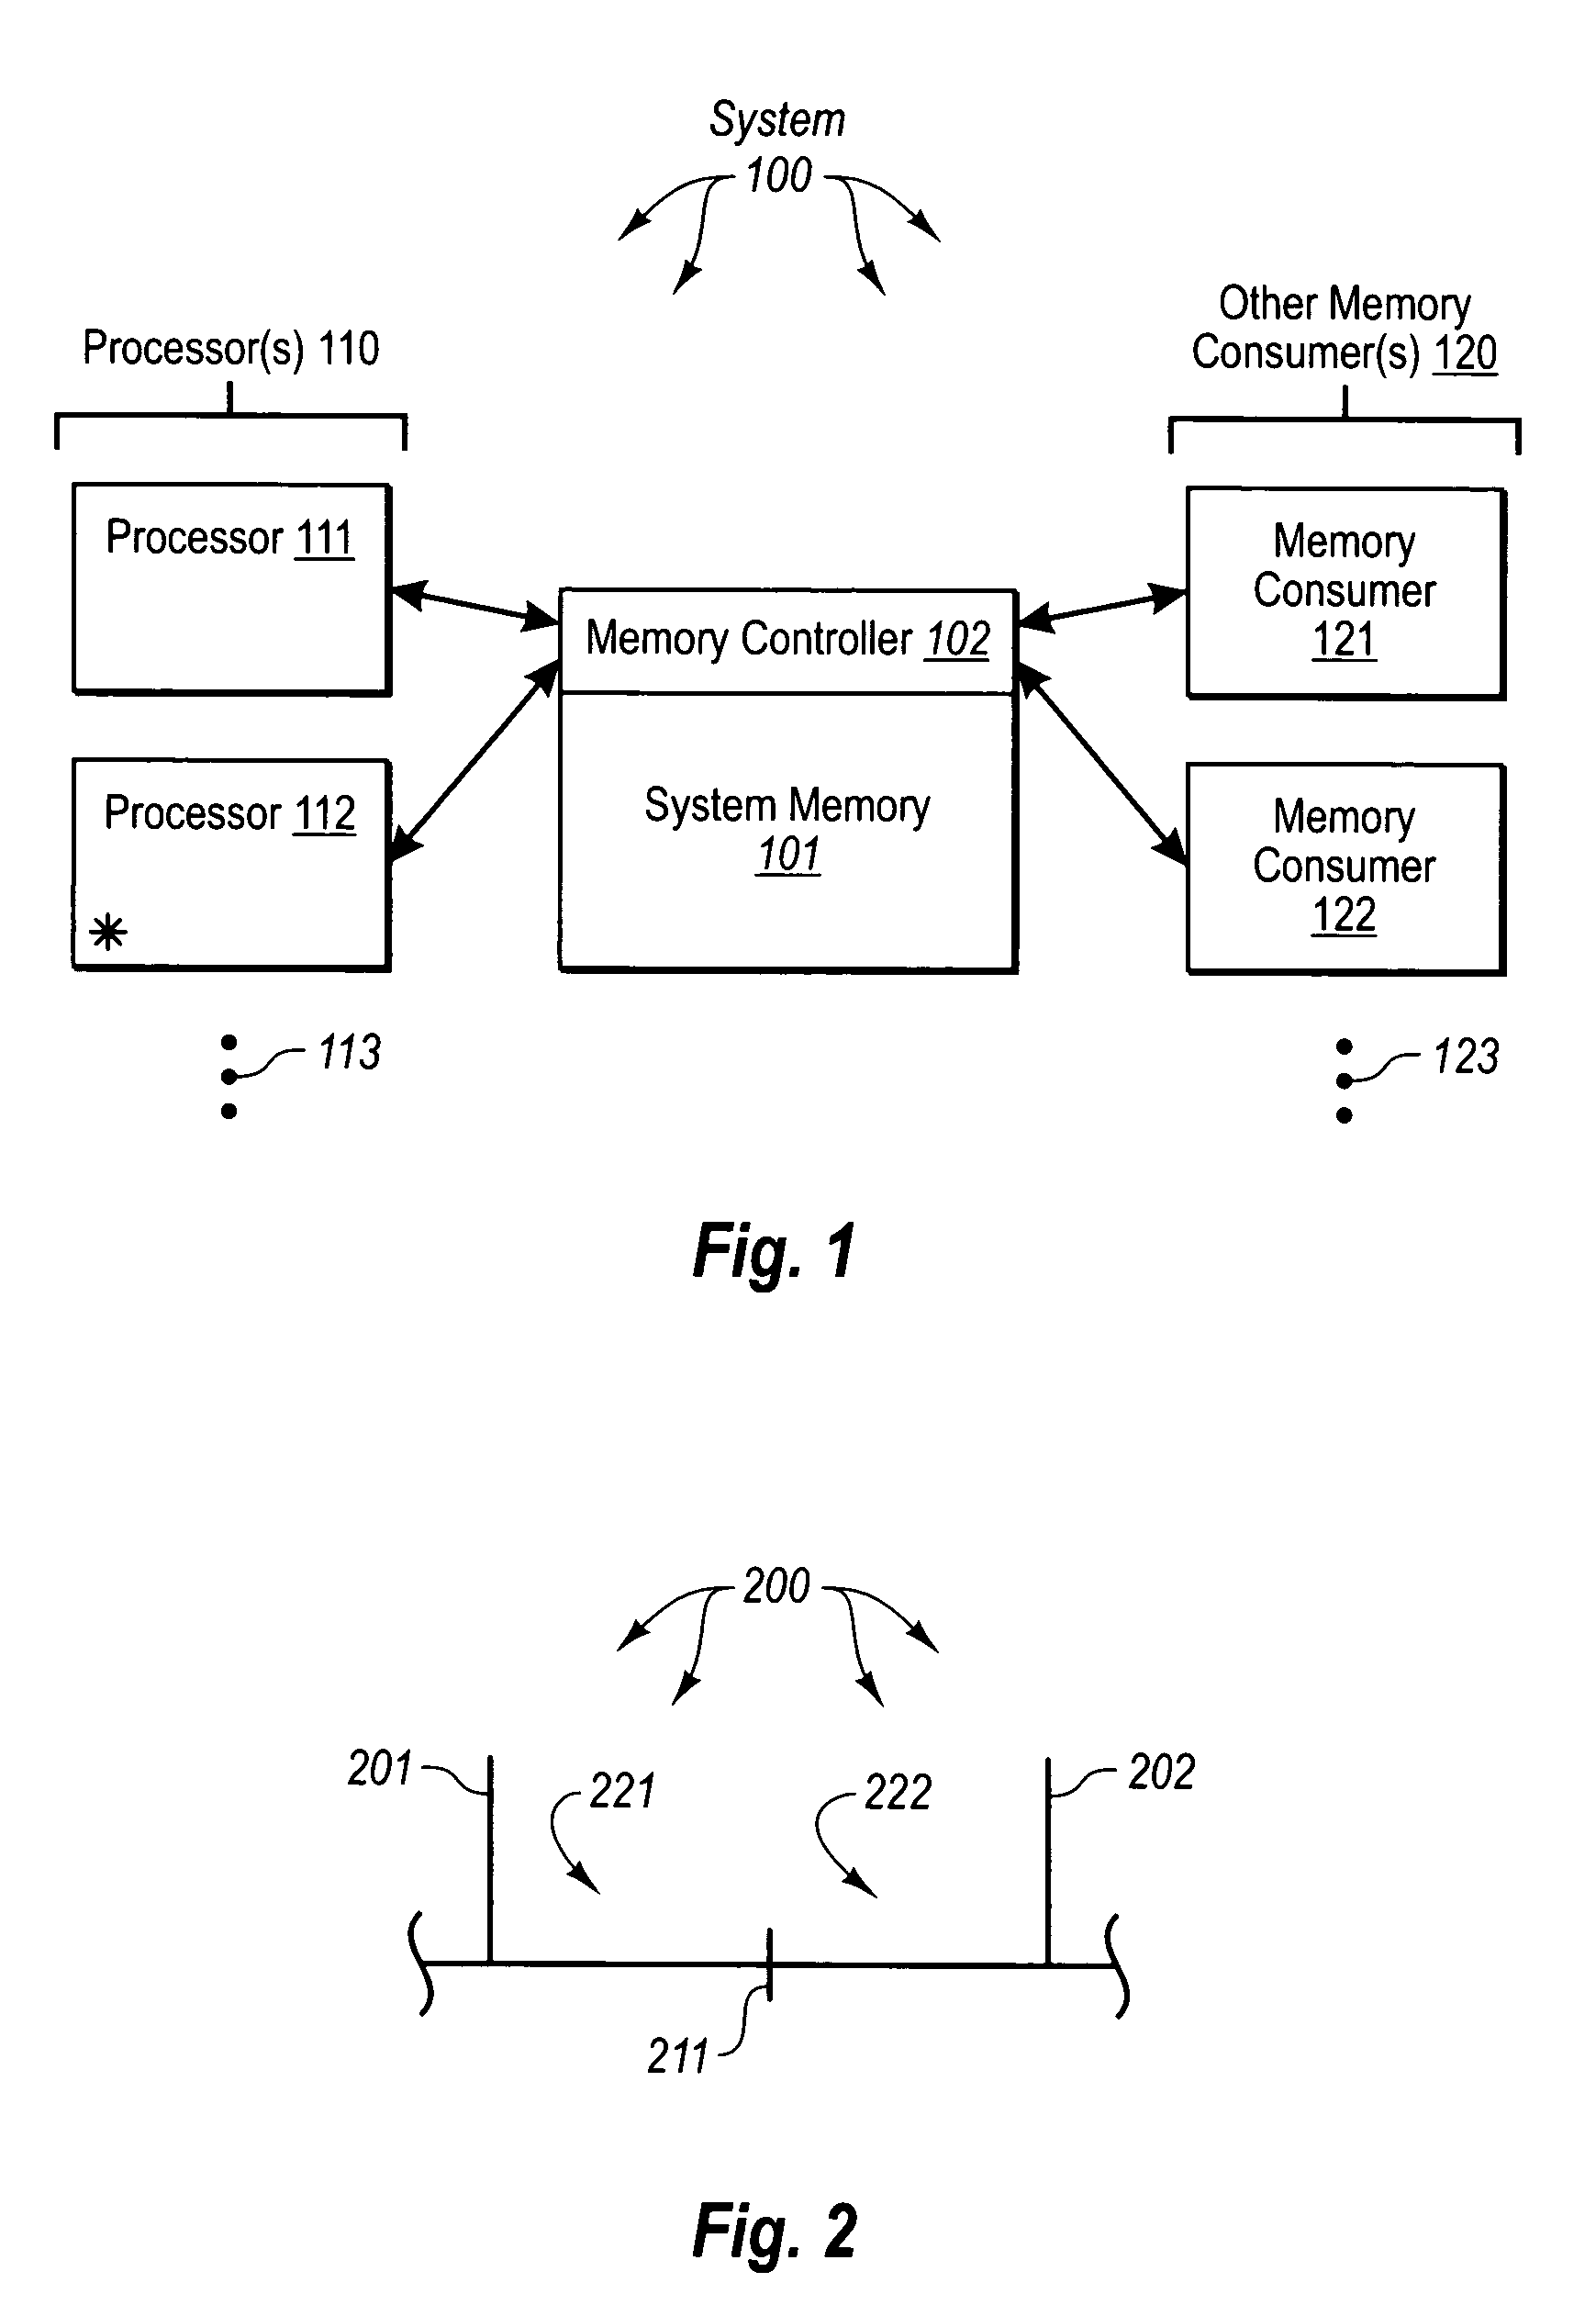 Contingent processor time division multiple access of memory in a multi-processor system to allow supplemental memory consumer access